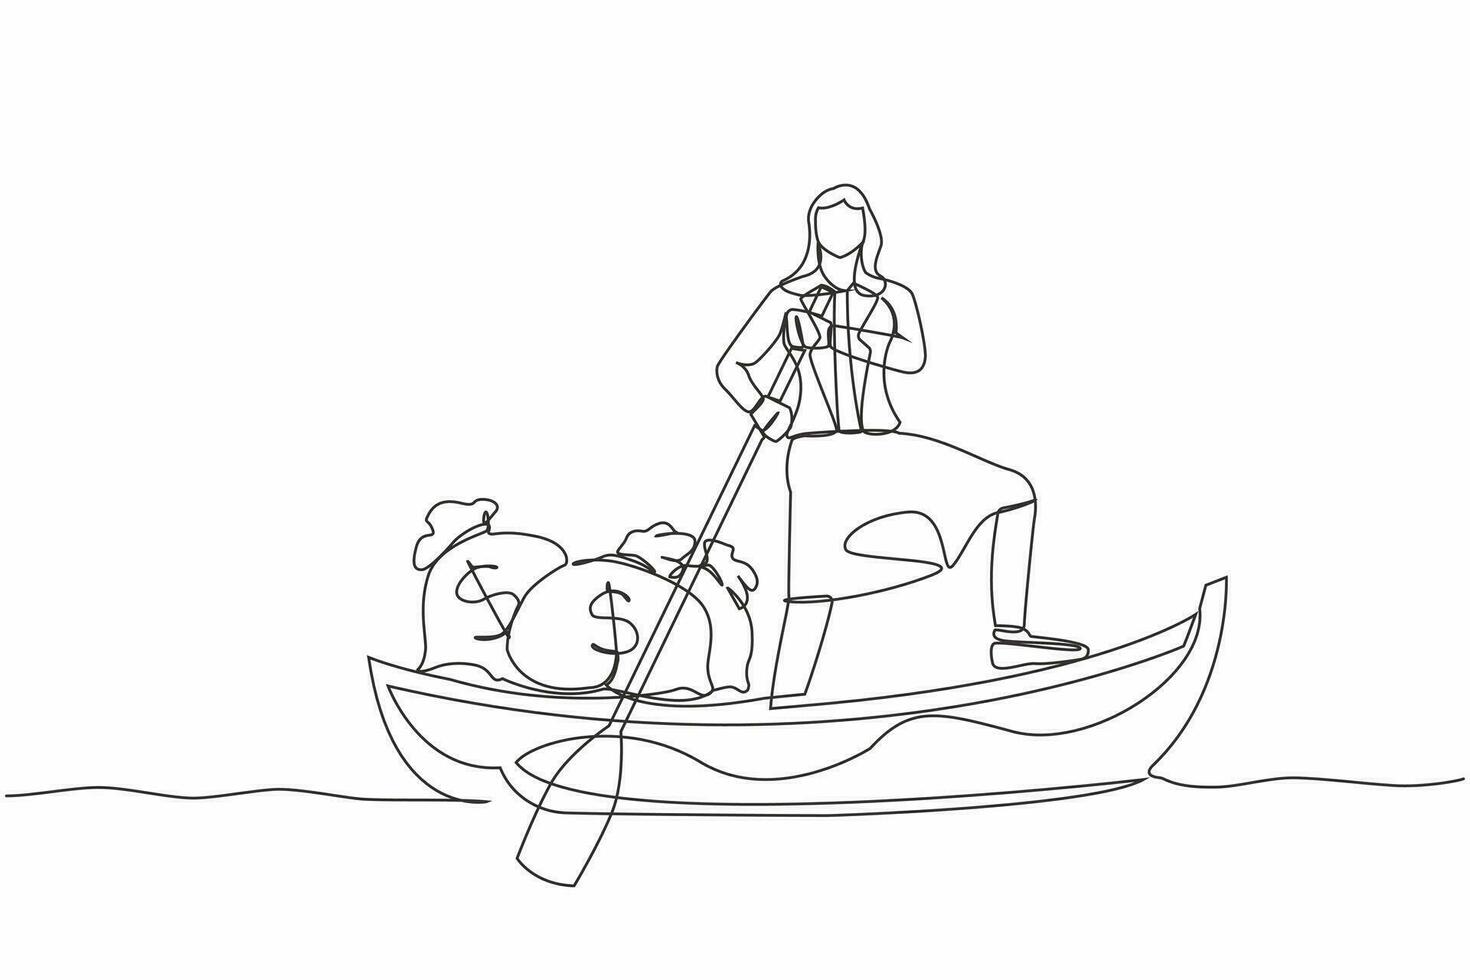 Single one line drawing of businesswoman sailing away on boat with money bag. Office worker escape with money. Financial success and profit concept. Continuous line design graphic vector illustration